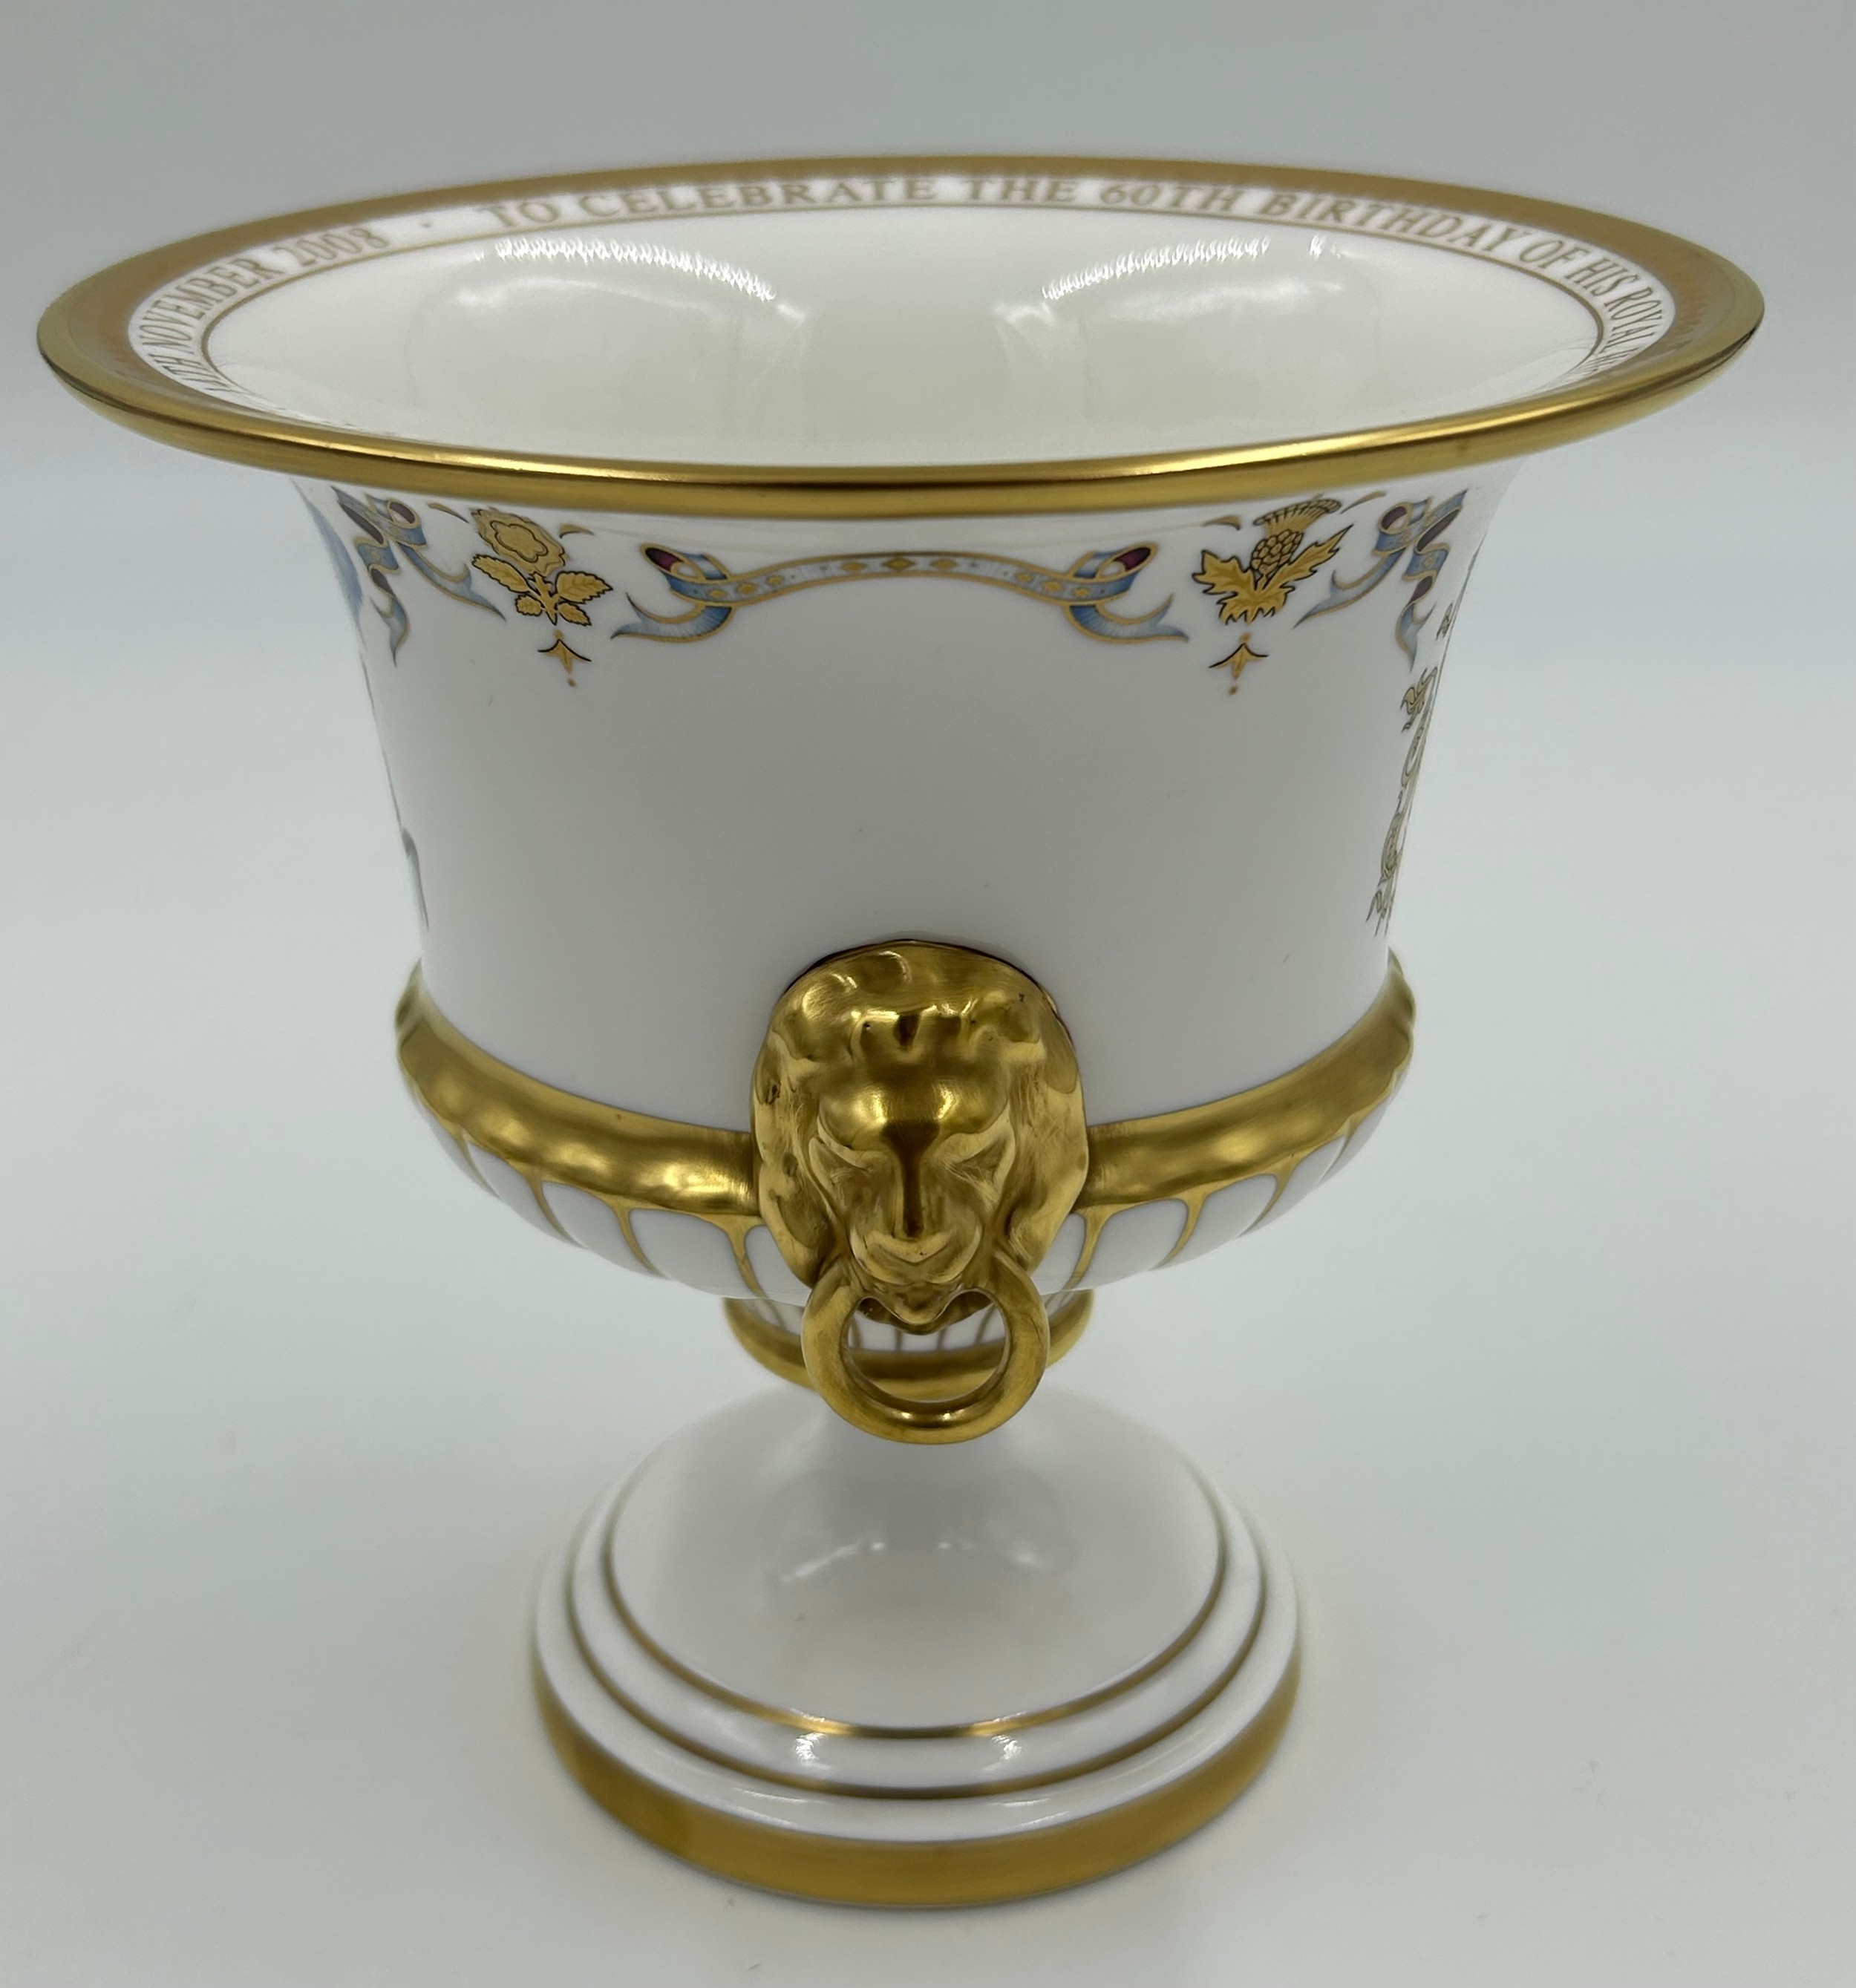 Two items of Commemorative Highgrove for the 60th birthday of the Charles Prince of Wales both - Image 4 of 4